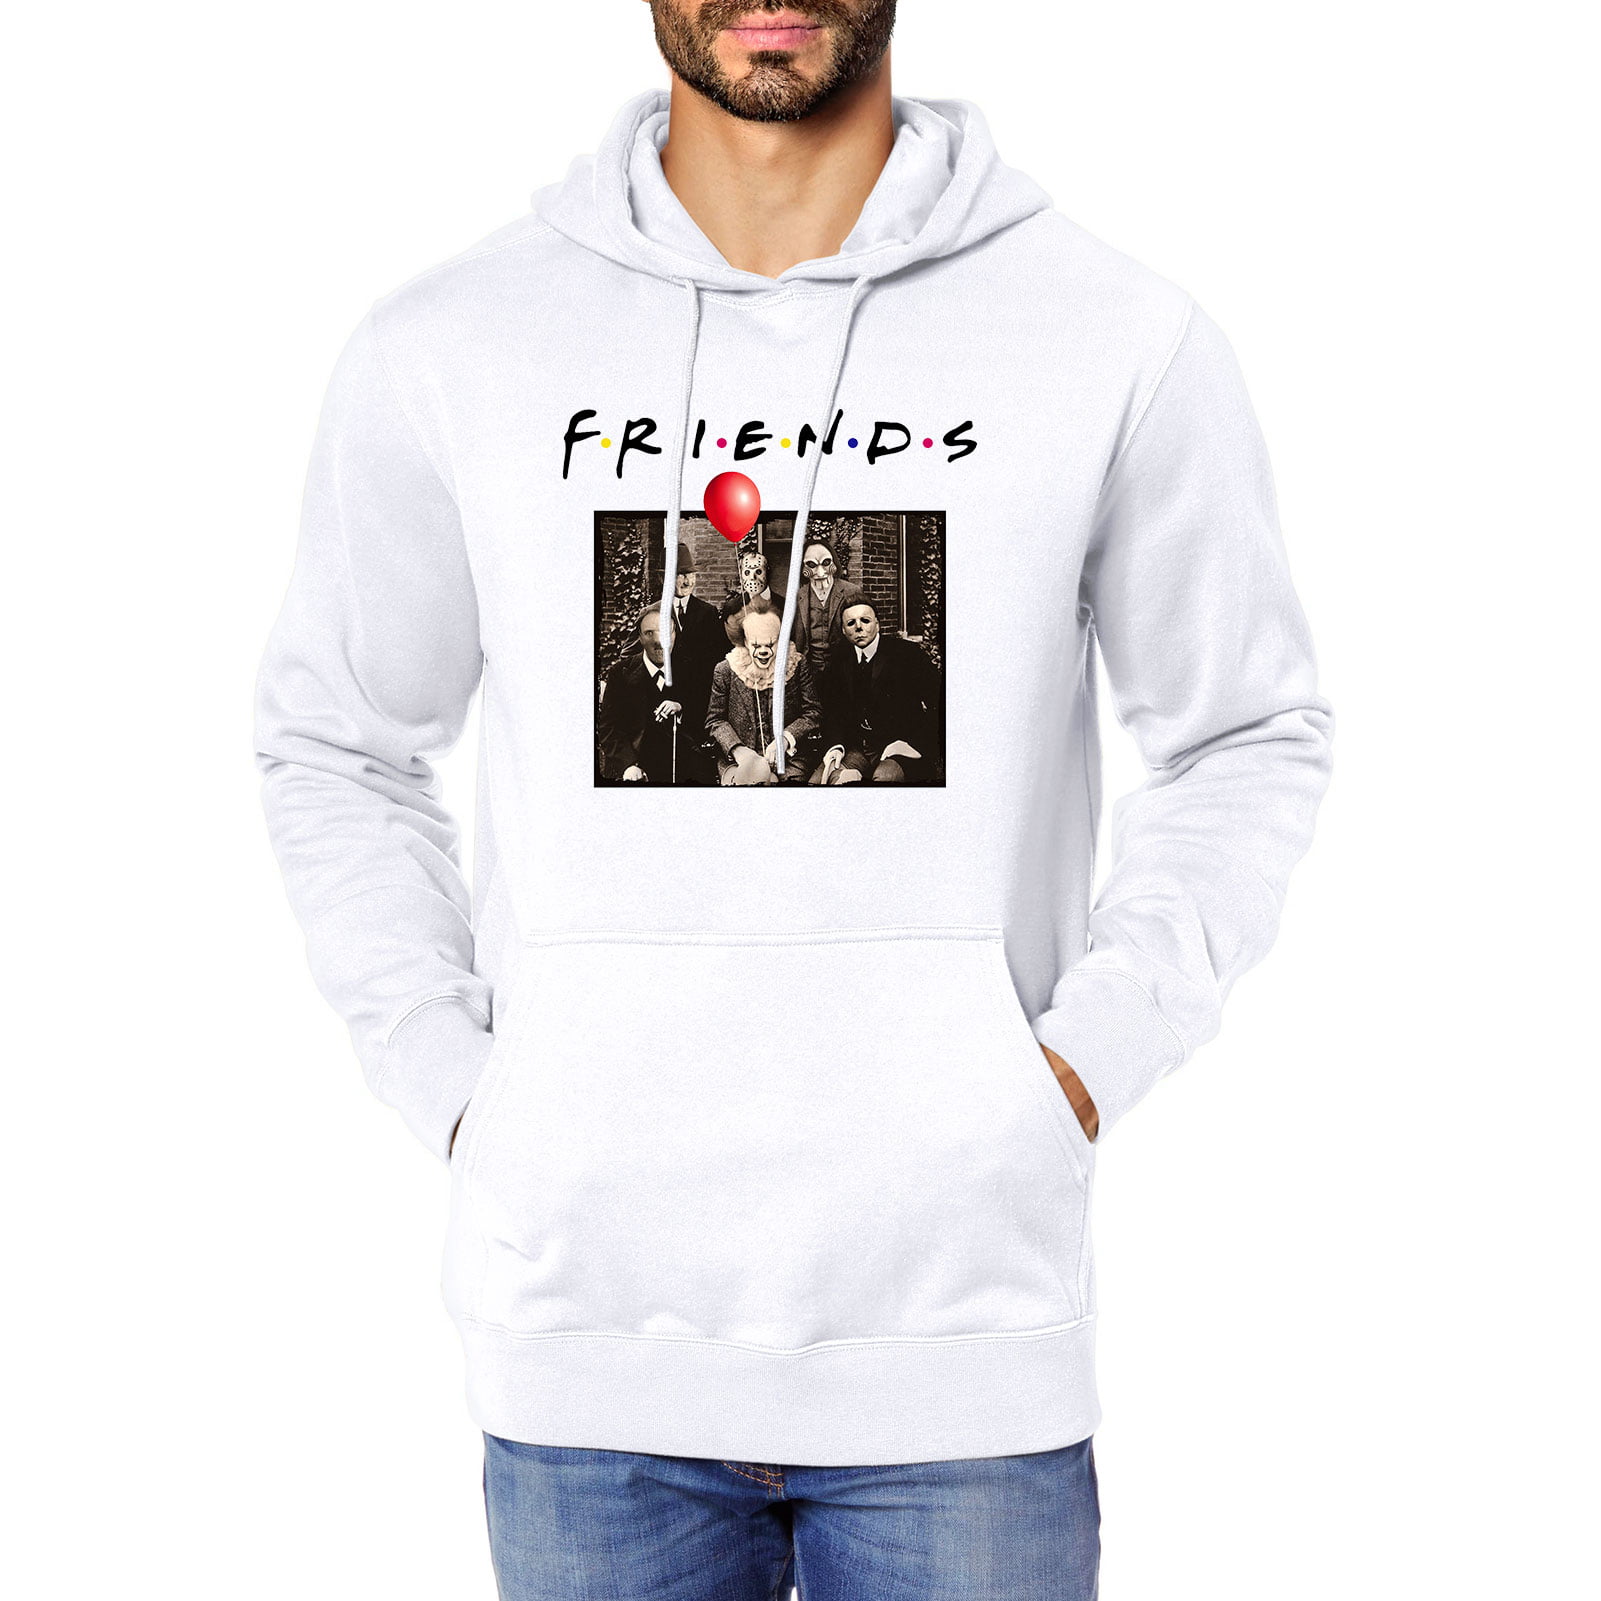 Jason Voorhees Friday the 13th Pennywise Halloween Freddy Michael Myers The Psycho Bunch Hoodie and Sweatshirt Chucky S-5XL Billy Saw